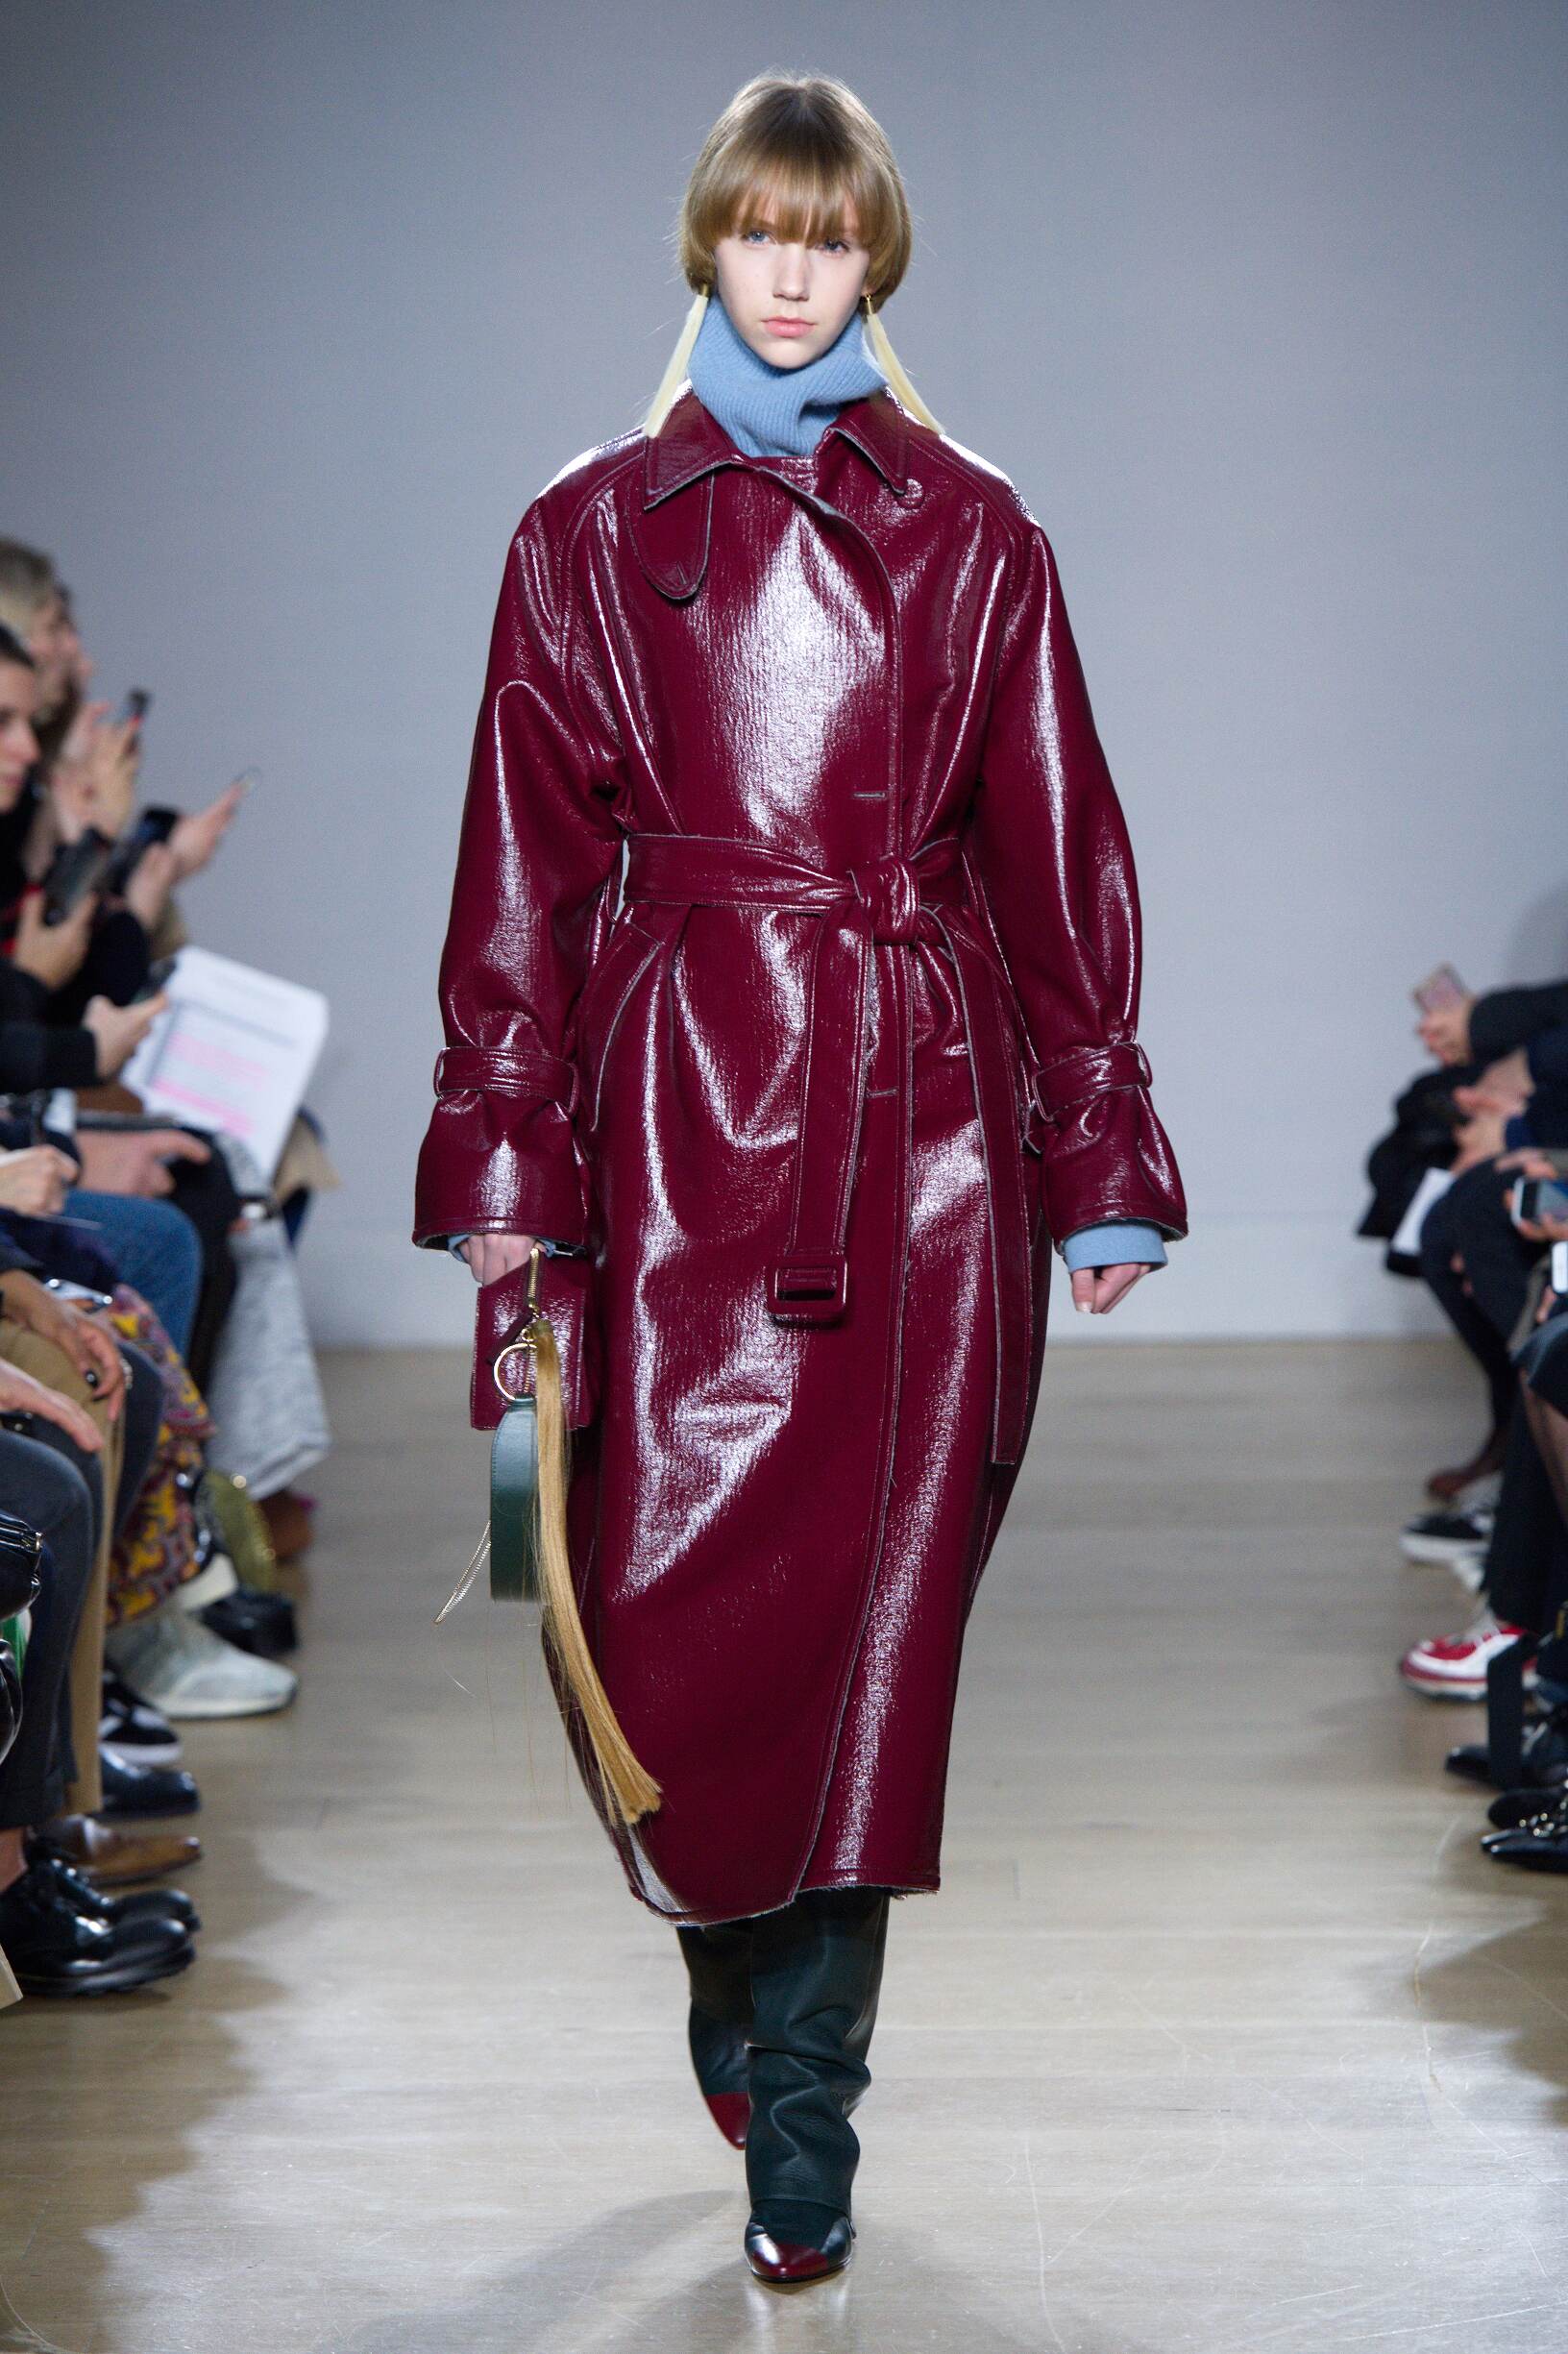 PORTS 1961 FALL WINTER 2019 WOMEN'S COLLECTION | The Skinny Beep